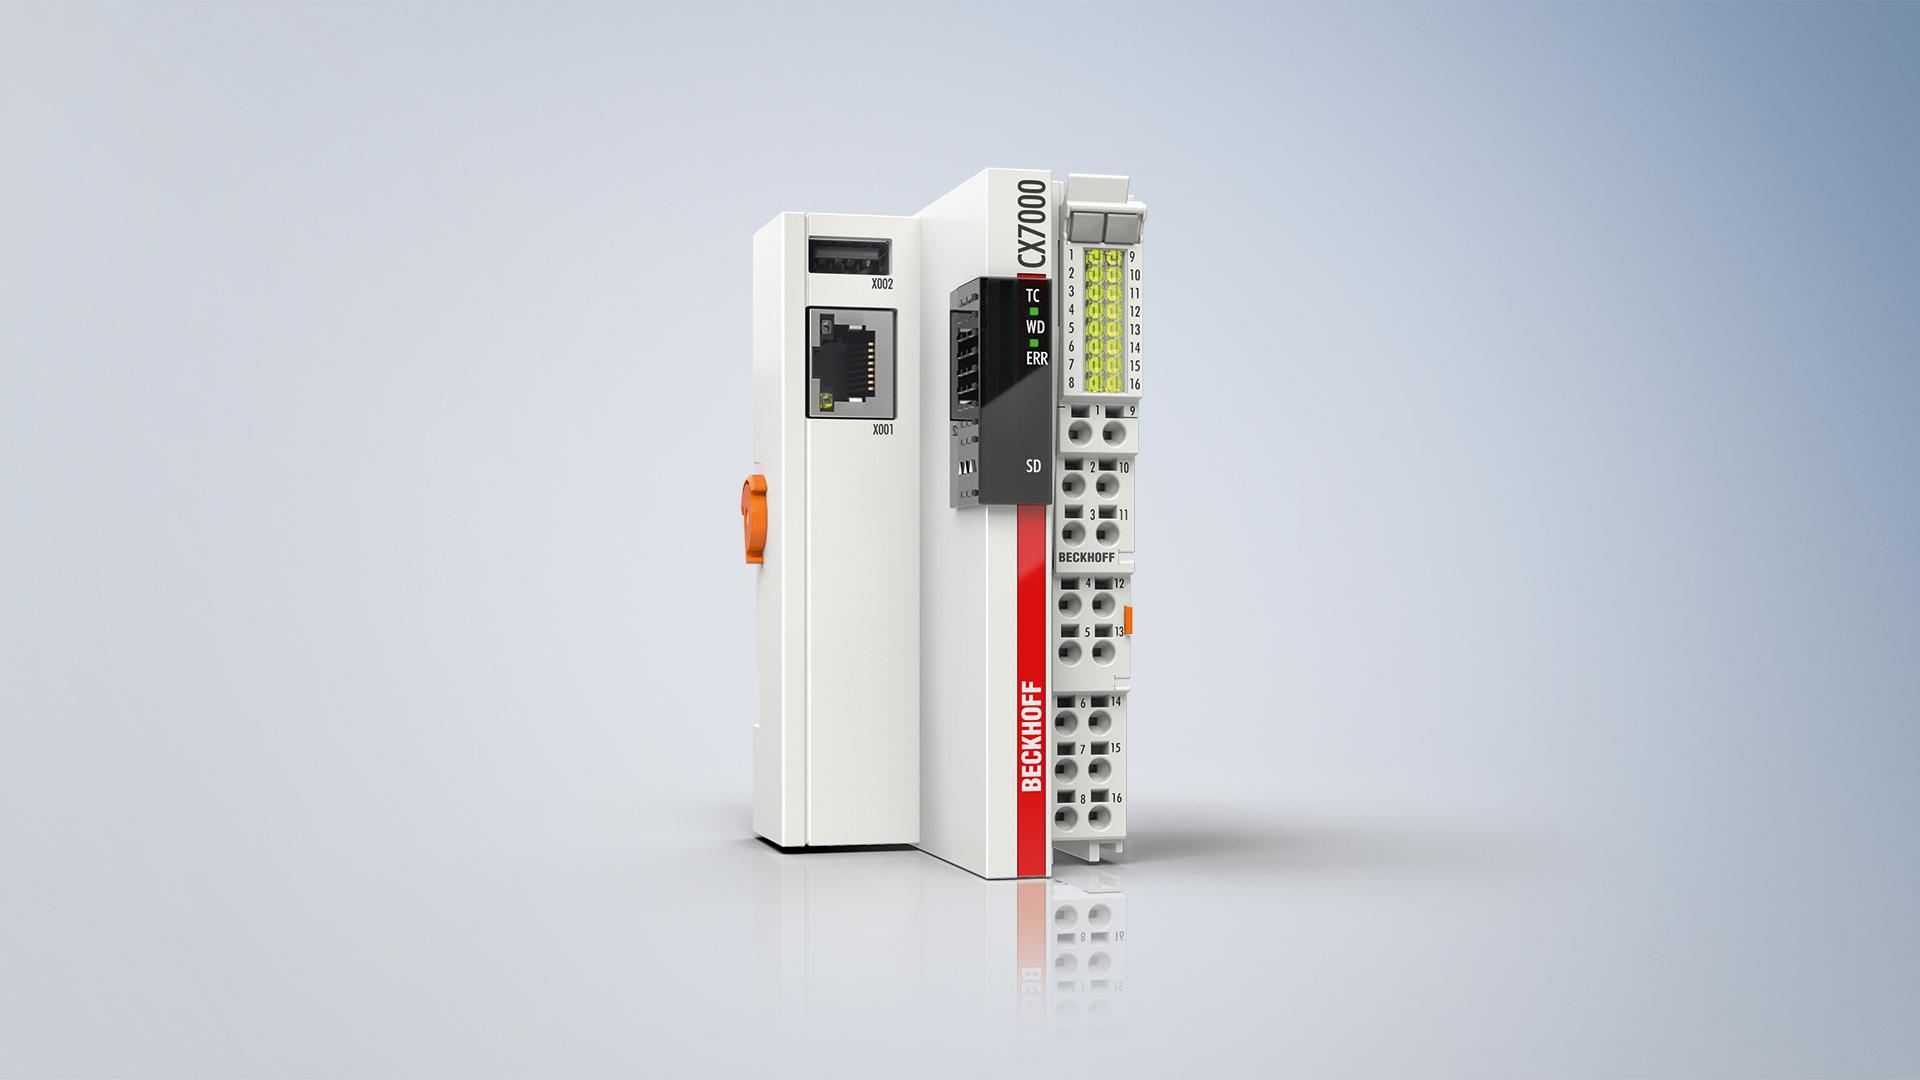 Cost-effective and stand-alone compact controller with 480 MHz processor and integrated multi-functional I/Os. 